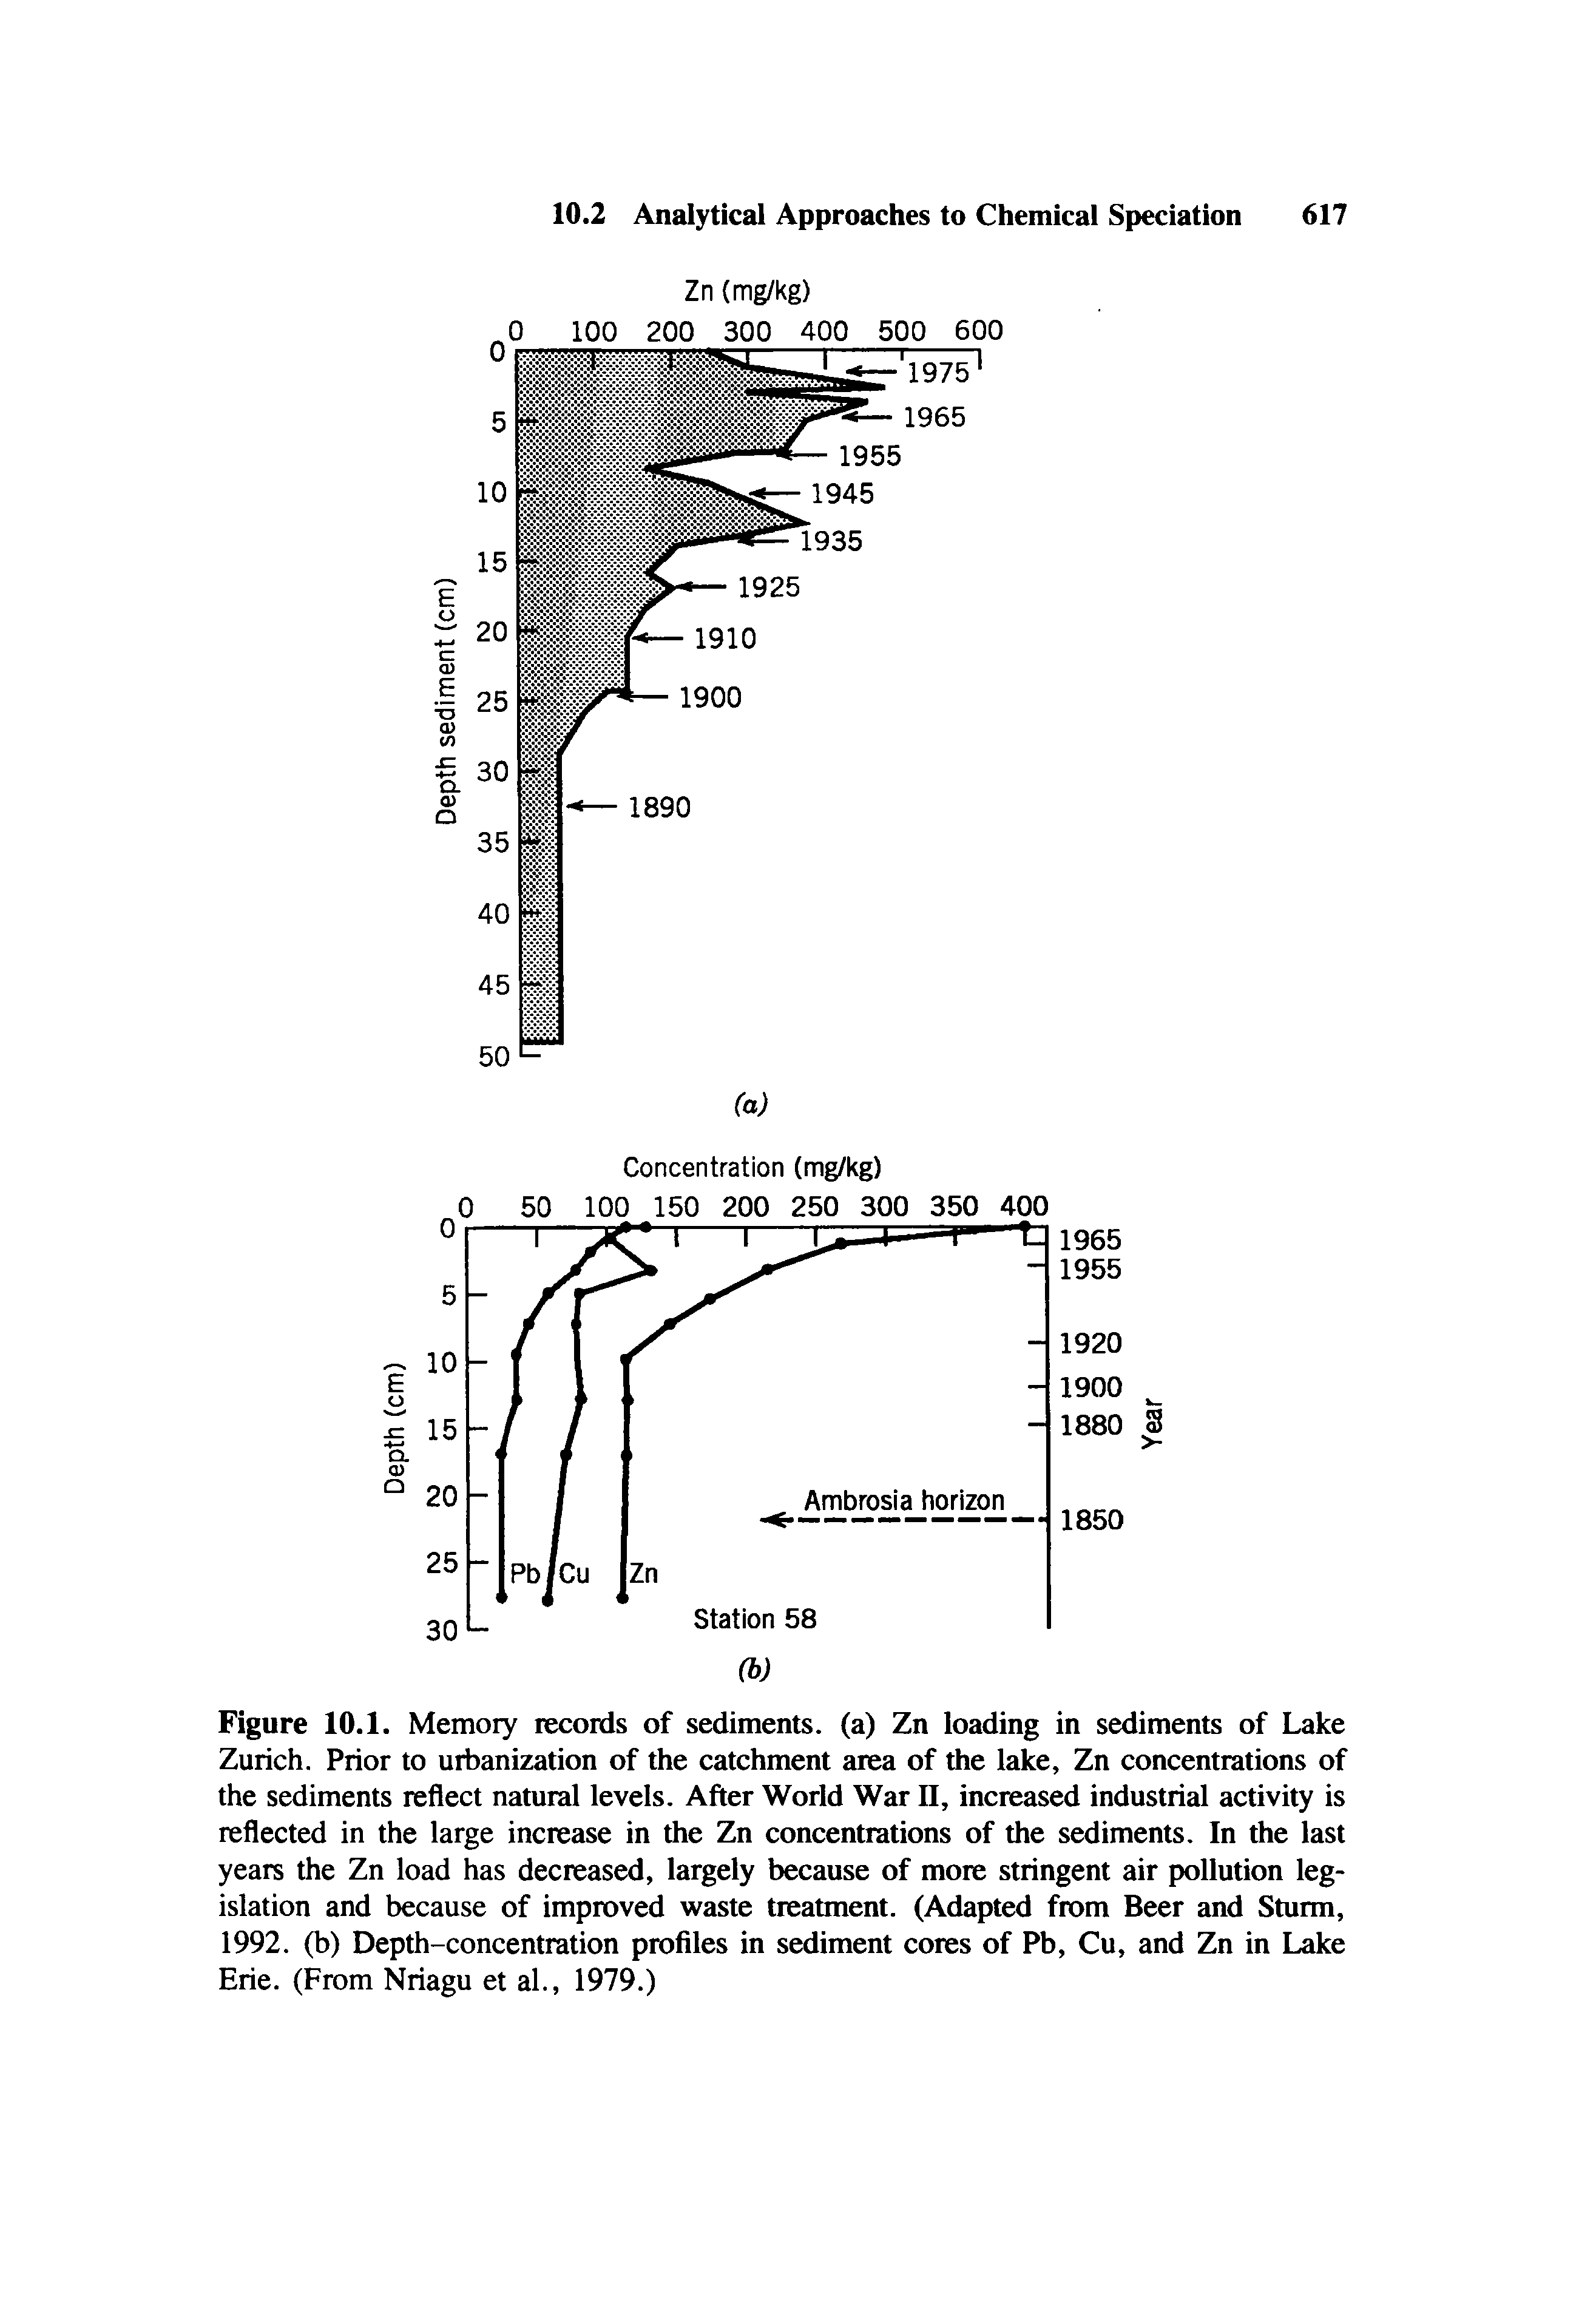 Figure 10.1. Memory records of sediments, (a) Zn loading in sediments of Lake Zurich. Prior to urbanization of the catchment area of the lake, Zn concentrations of the sediments reflect natural levels. After World War II, increased industrial activity is reflected in the large increase in the Zn concentrations of the sediments. In the last years the Zn load has decreased, largely because of more stringent air pollution legislation and because of improved waste treatment. (Adapted from Beer and Sturm, 1992. (b) Depth-concentration profiles in sediment cores of Pb, Cu, and Zn in Lake Erie. (From Nriagu et al., 1979.)...